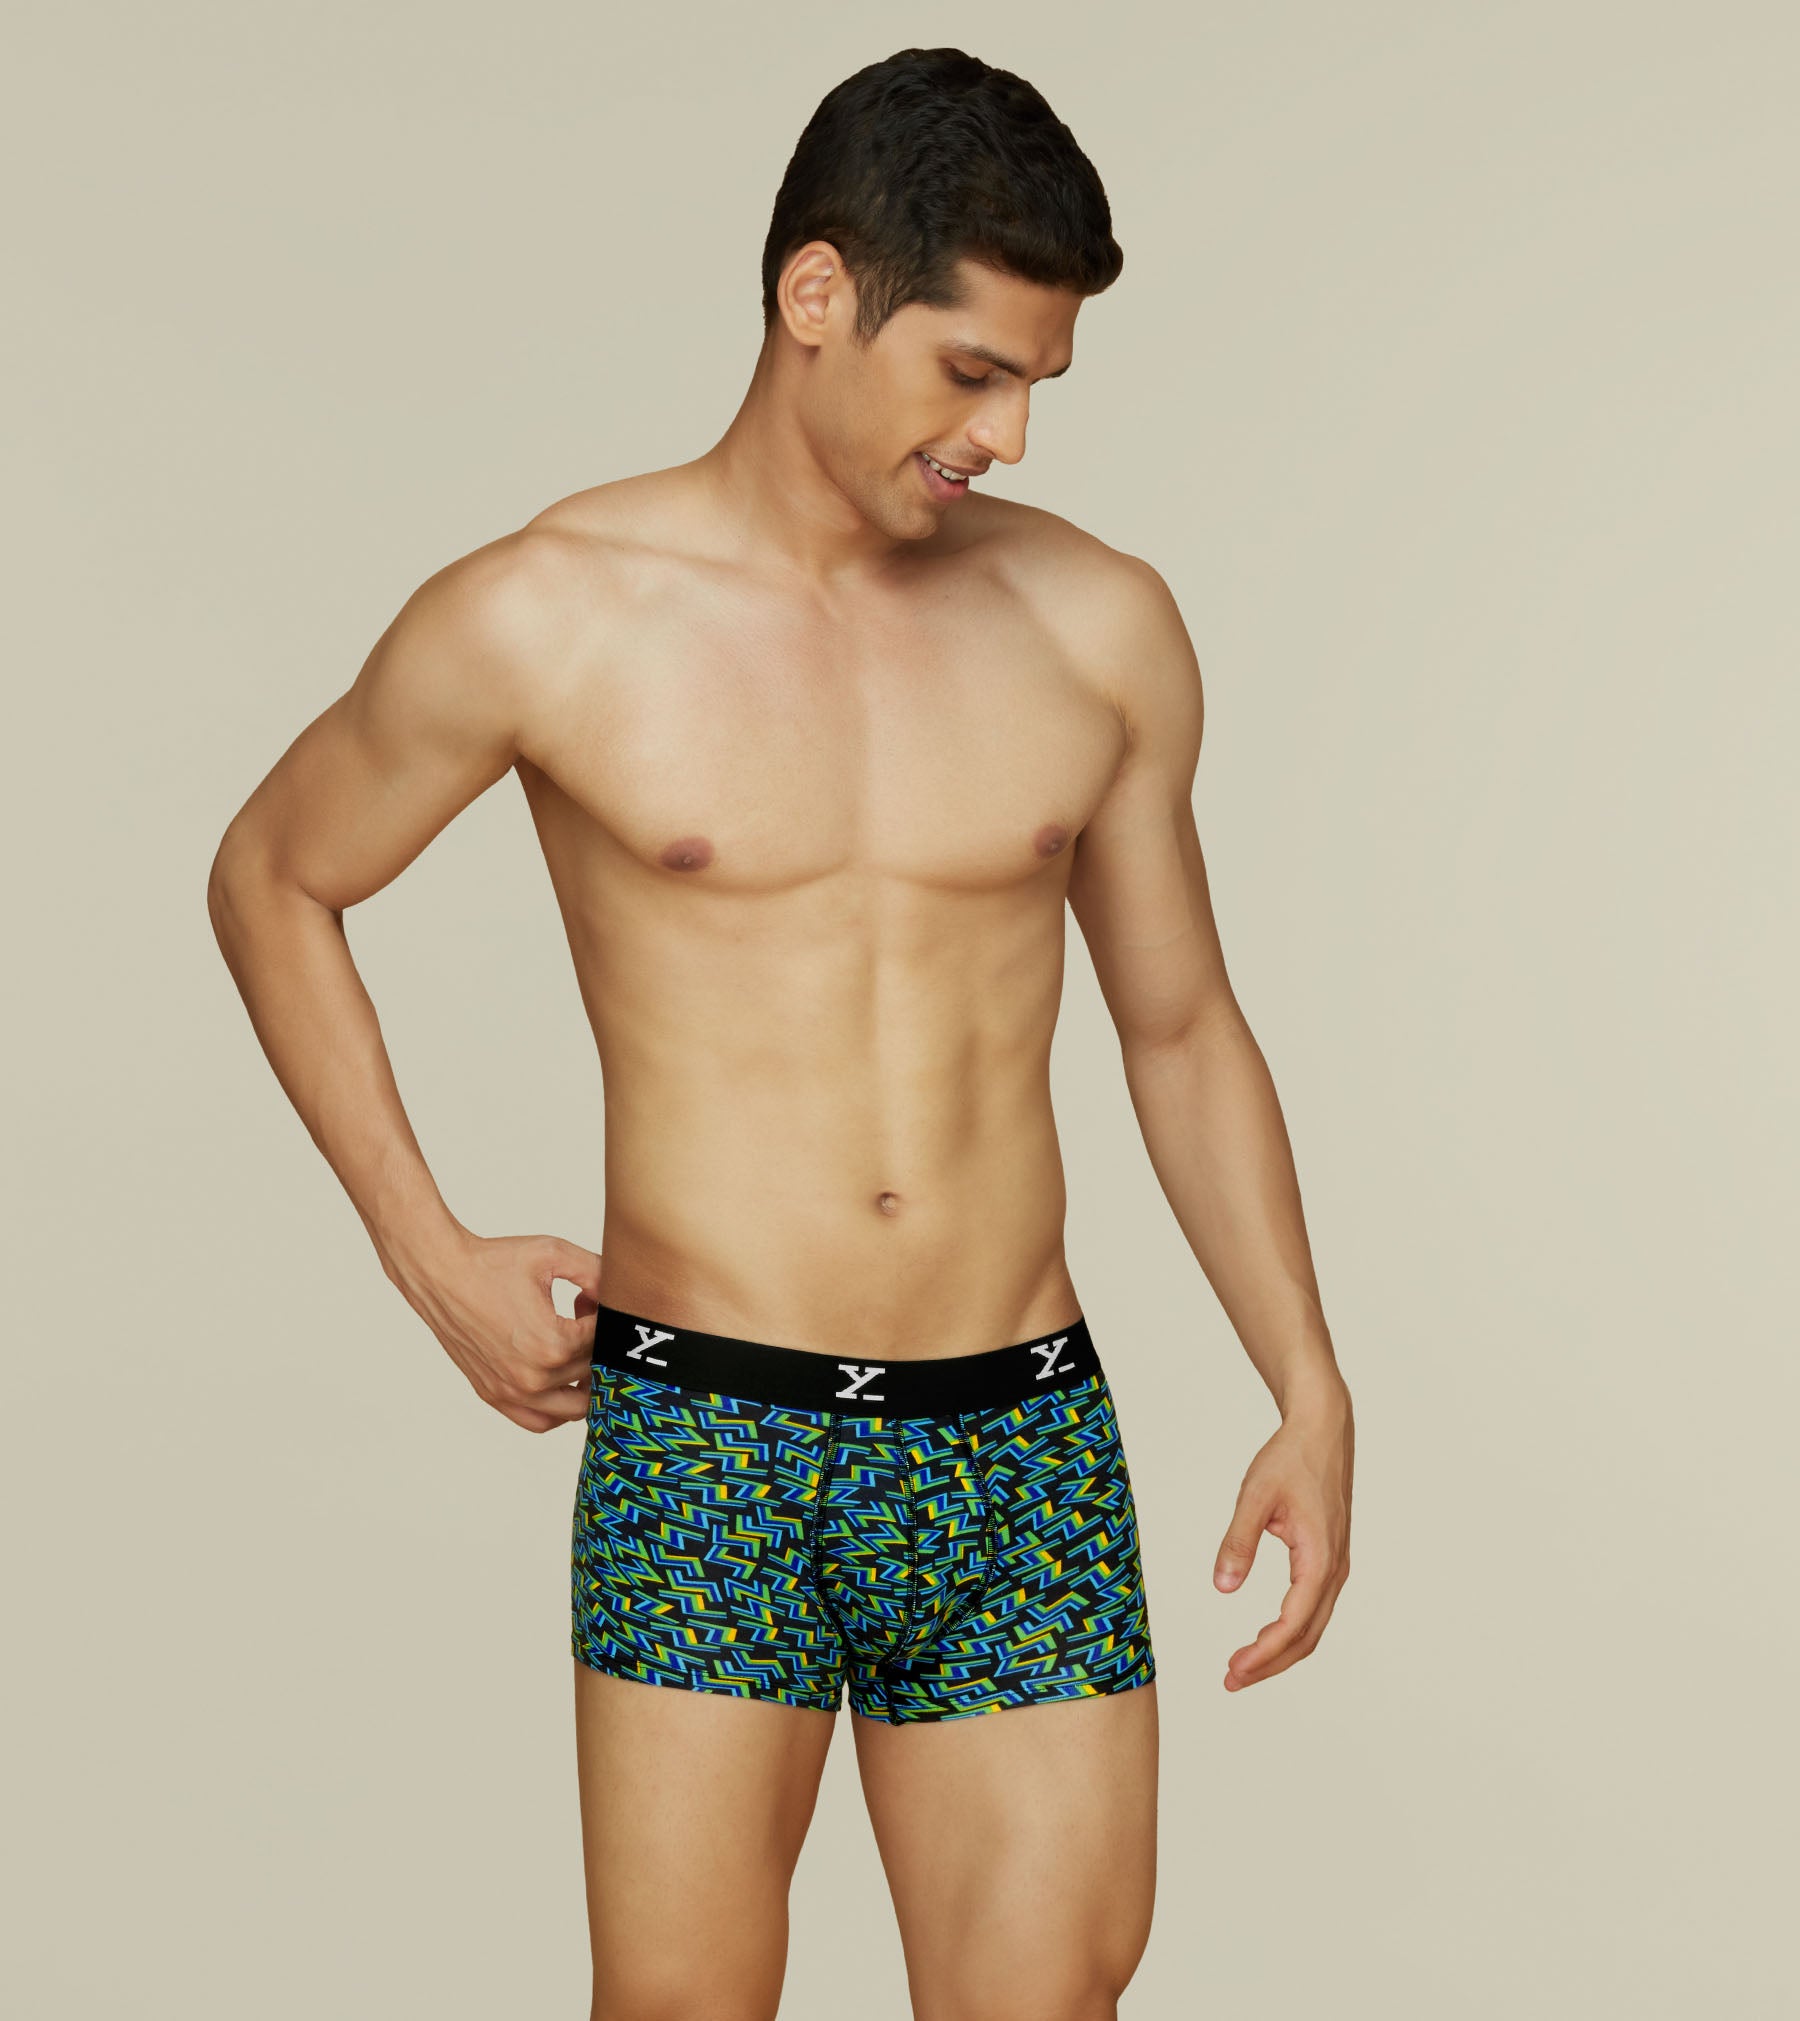 Boxers or briefs, gentlemen? How to choose the right underwear for your  body type - CNA Lifestyle